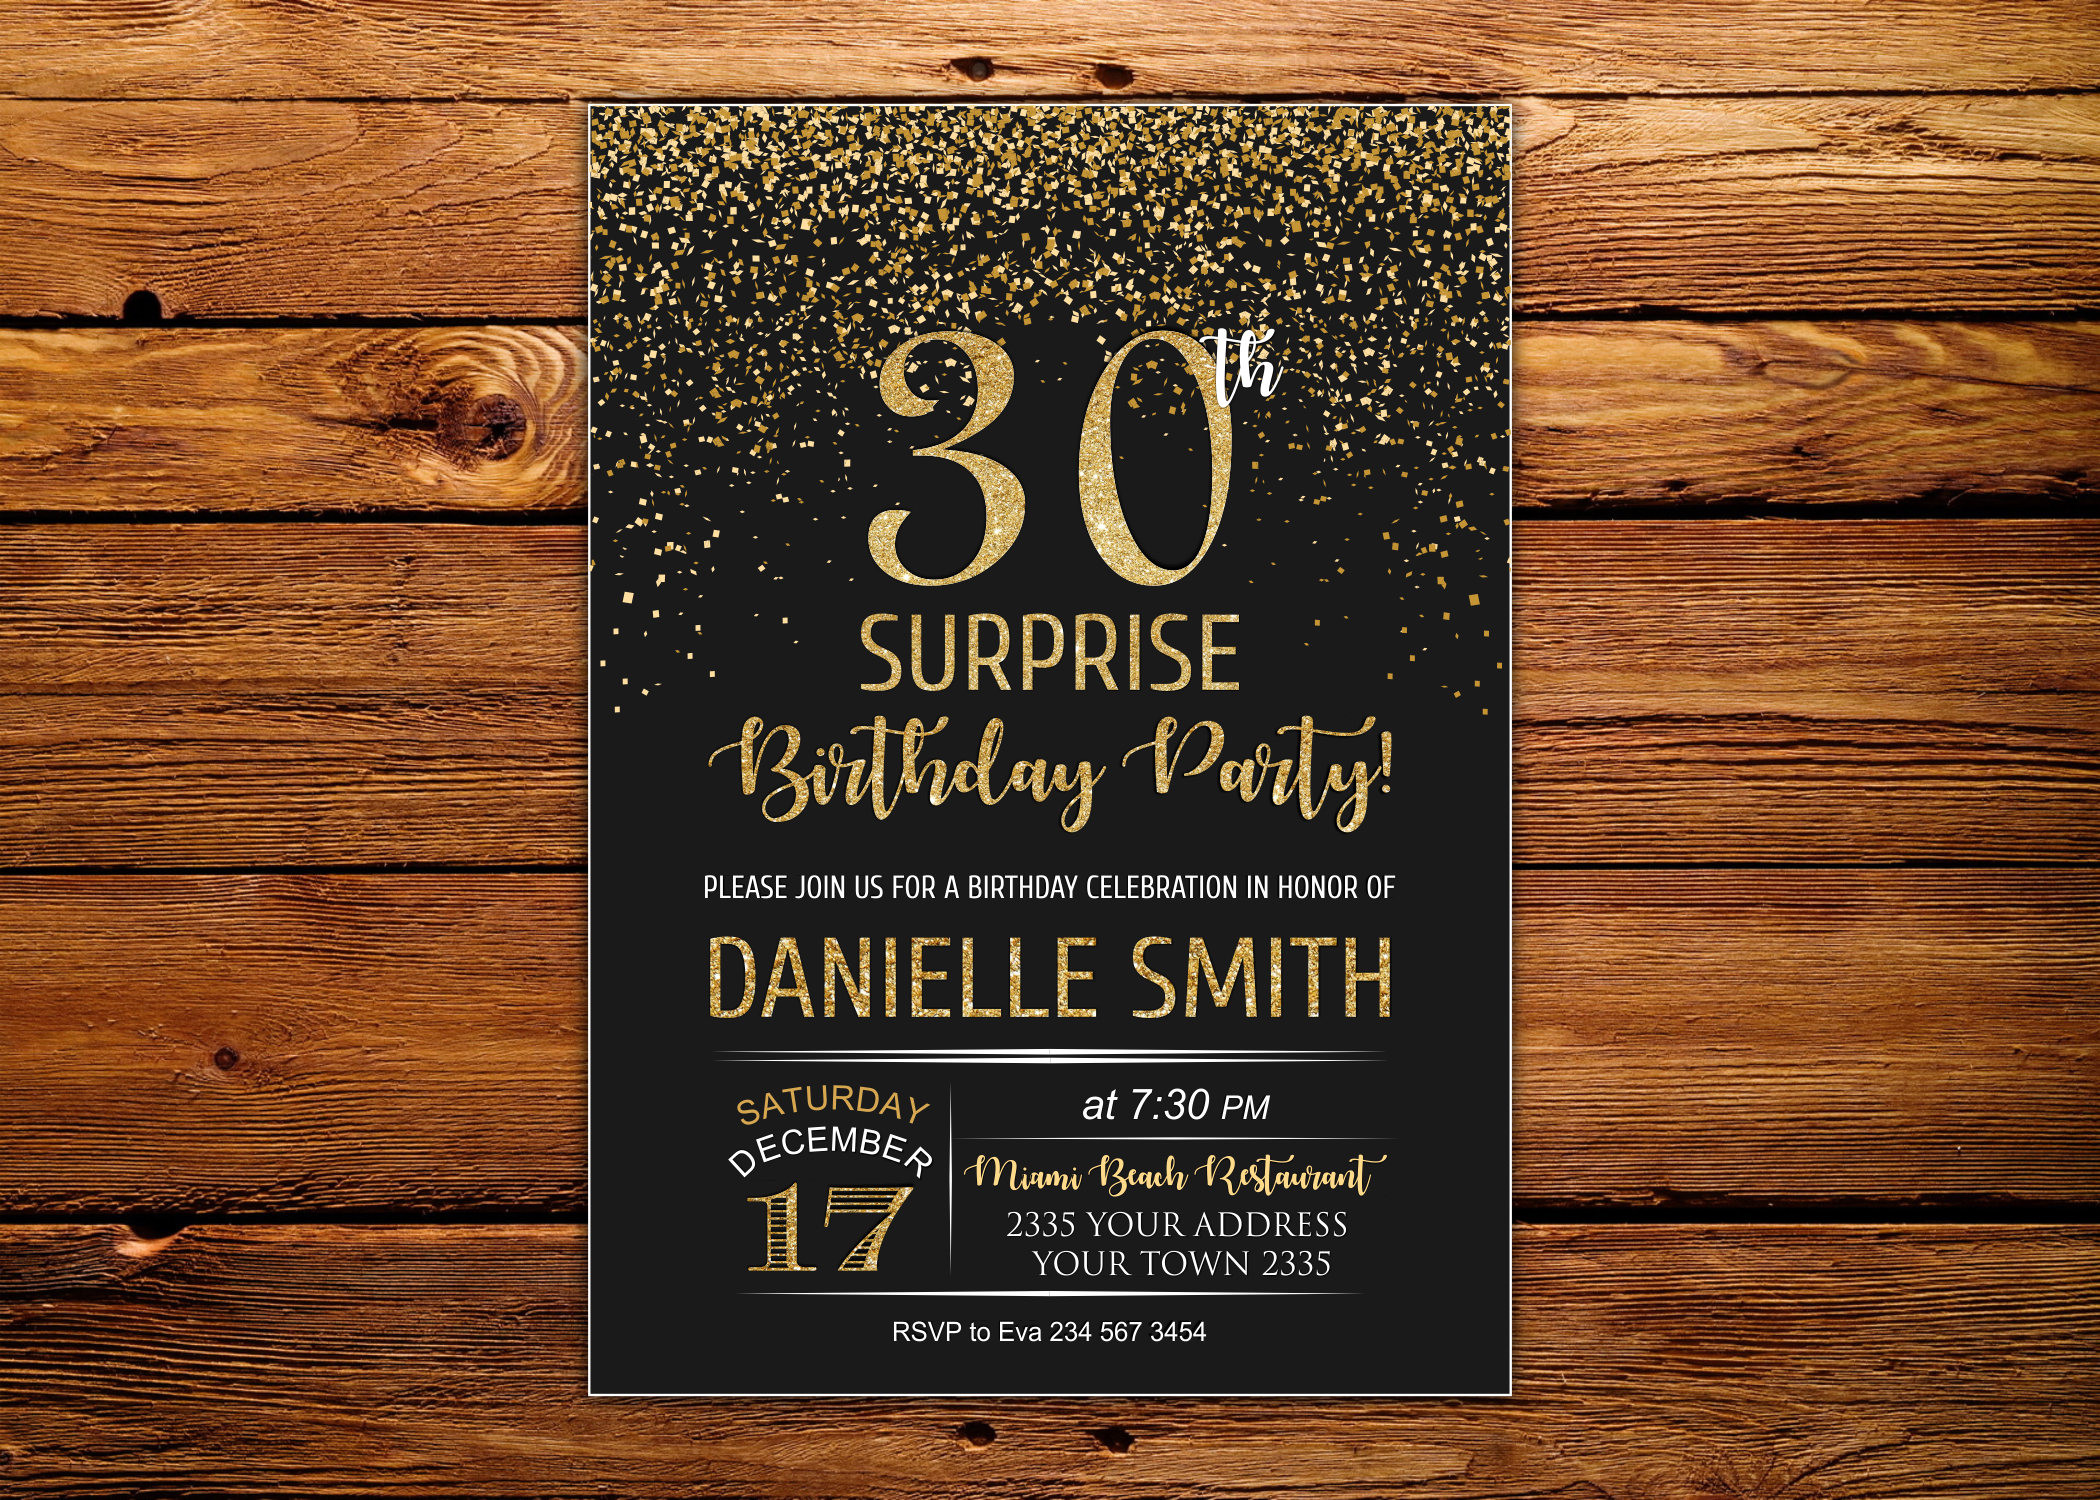 Surprise 30th Birthday Party Invitations
 Surprise 30th Birthday Party invitation 30th Birthday